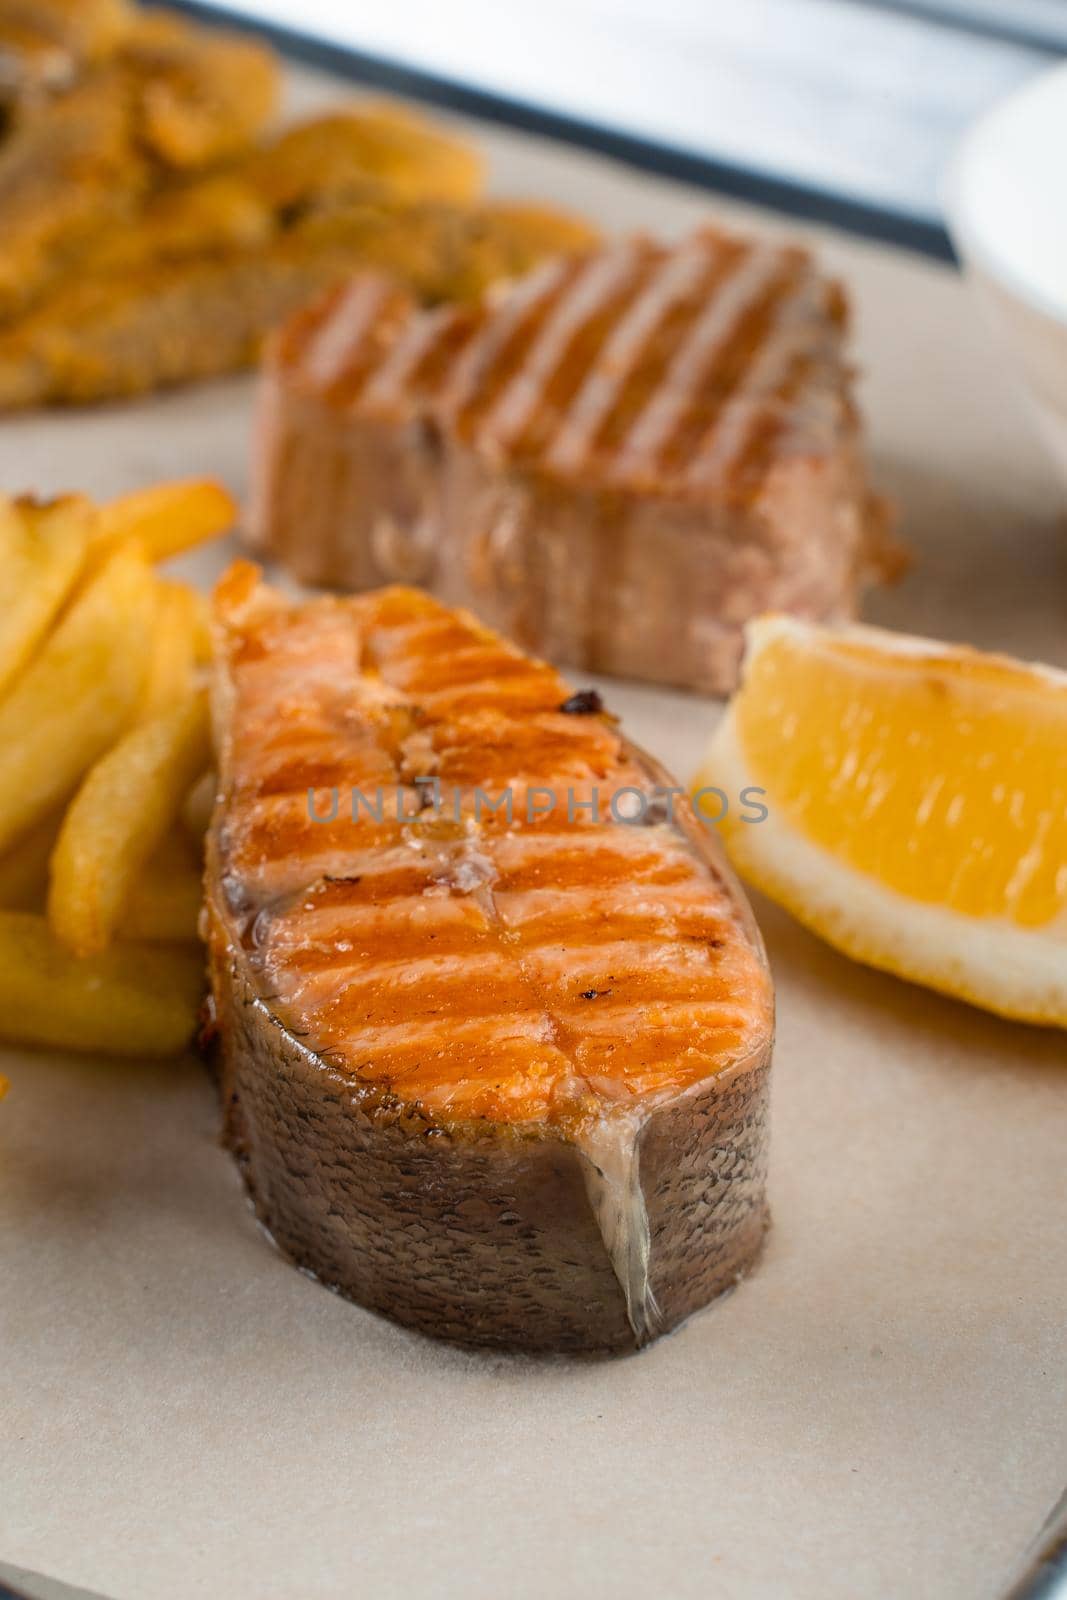 Grilled salmon steak with lemon and fries on light background